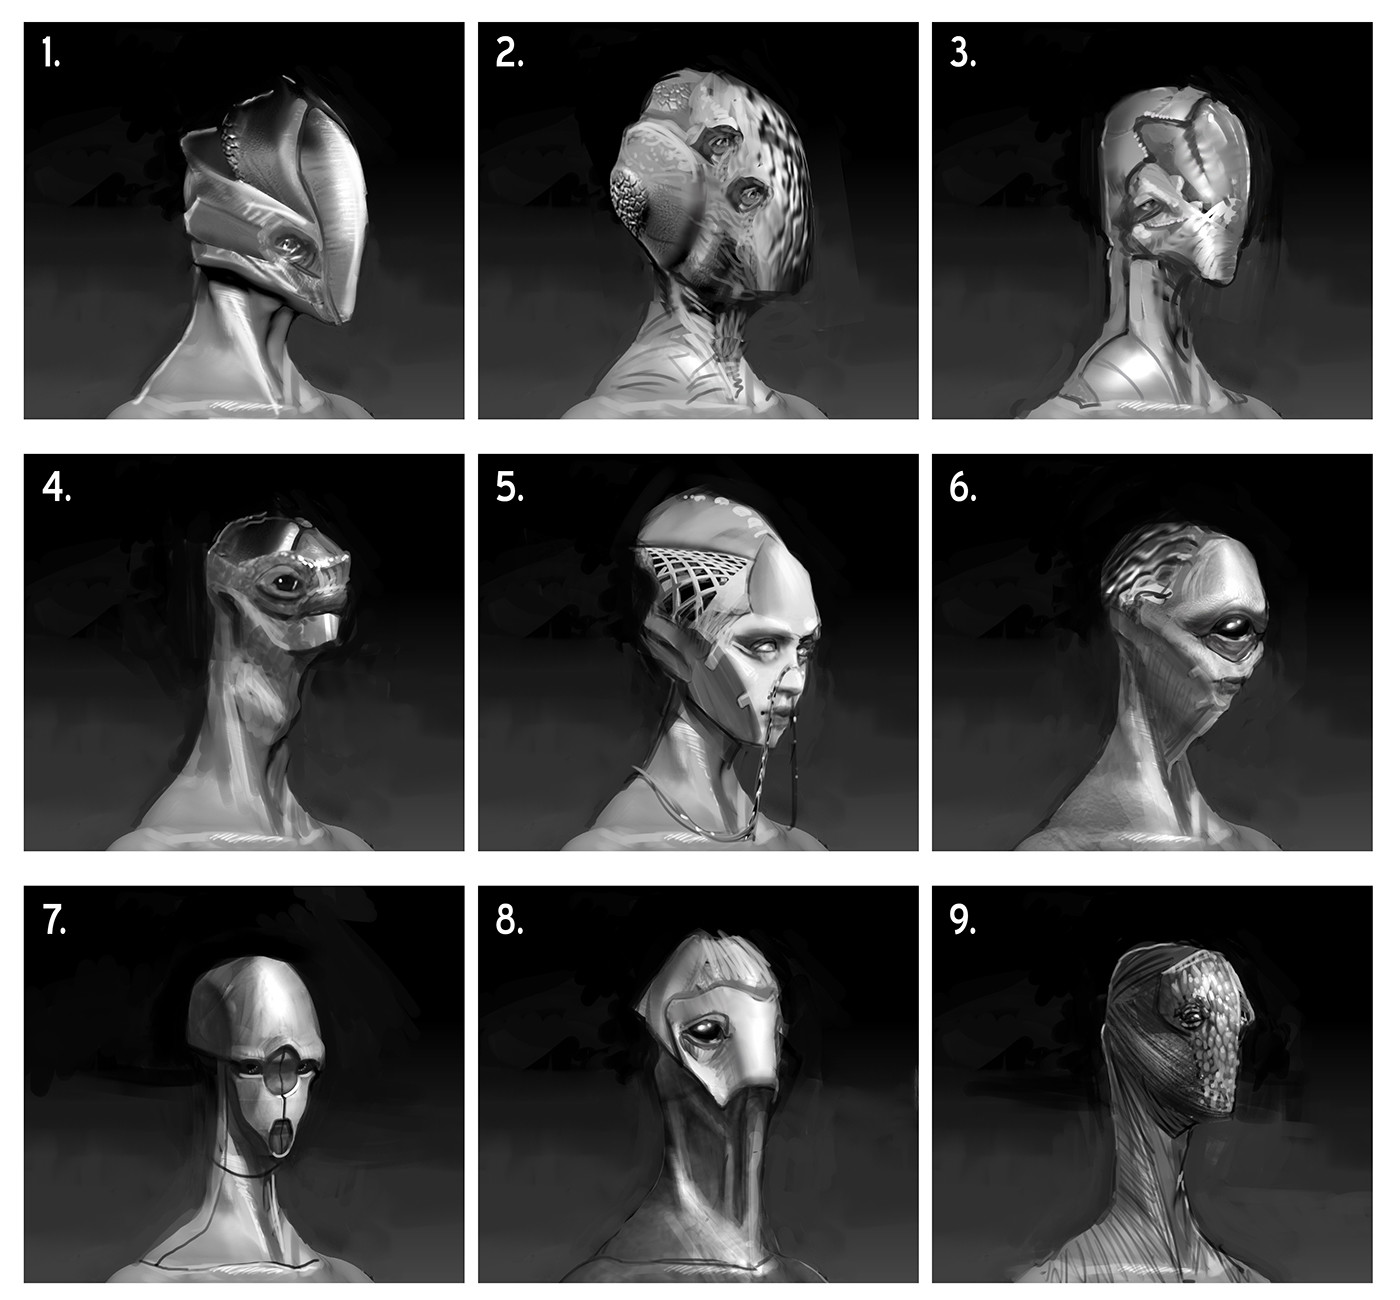 Design thumbnails for the face of the alien.